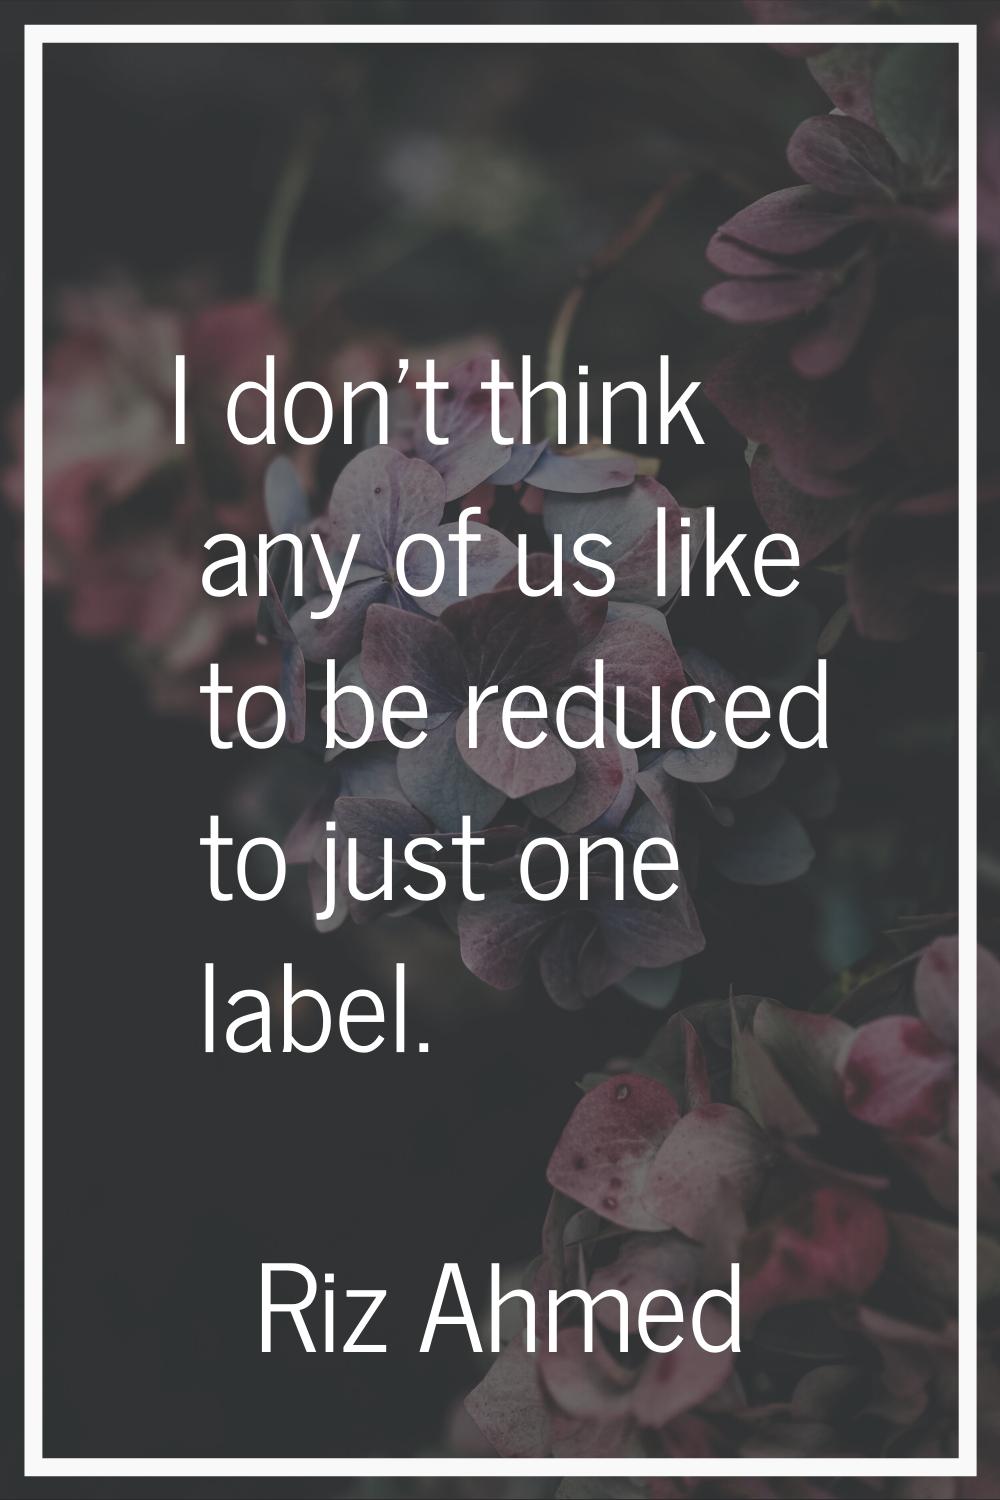 I don't think any of us like to be reduced to just one label.